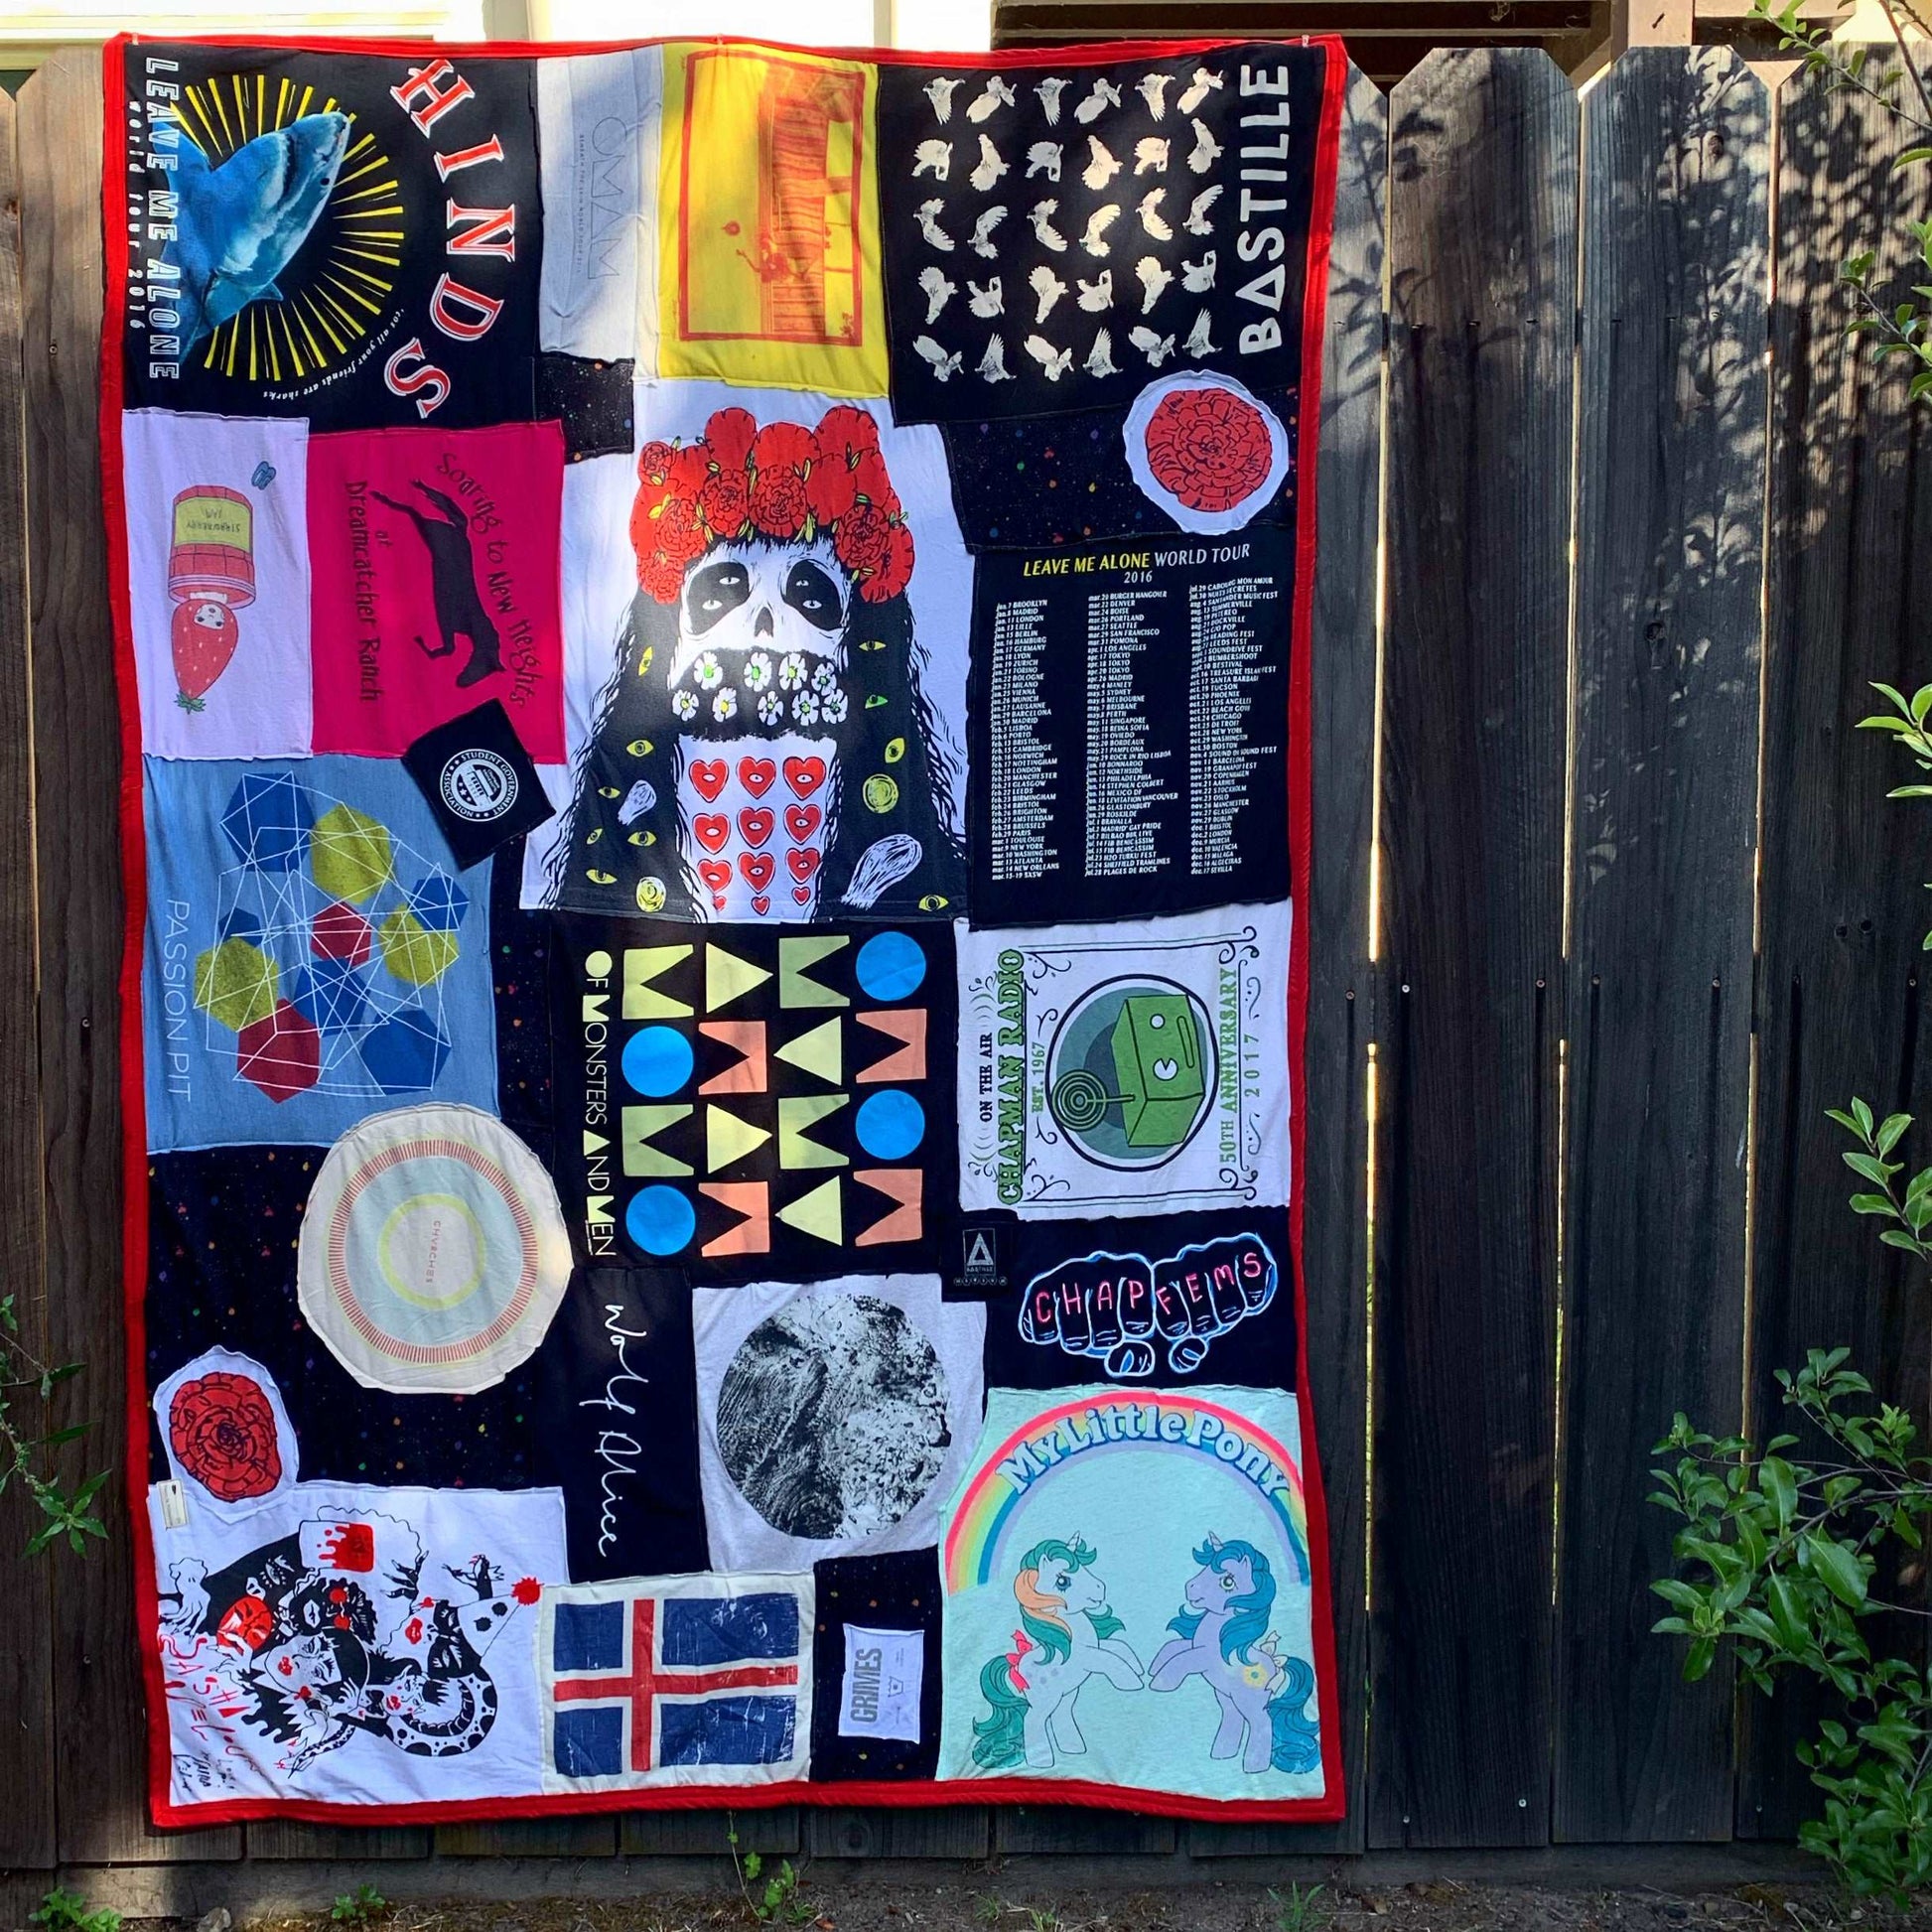 A quilt made fro various t shirts, with a red border, hung up for display on a fence railing.